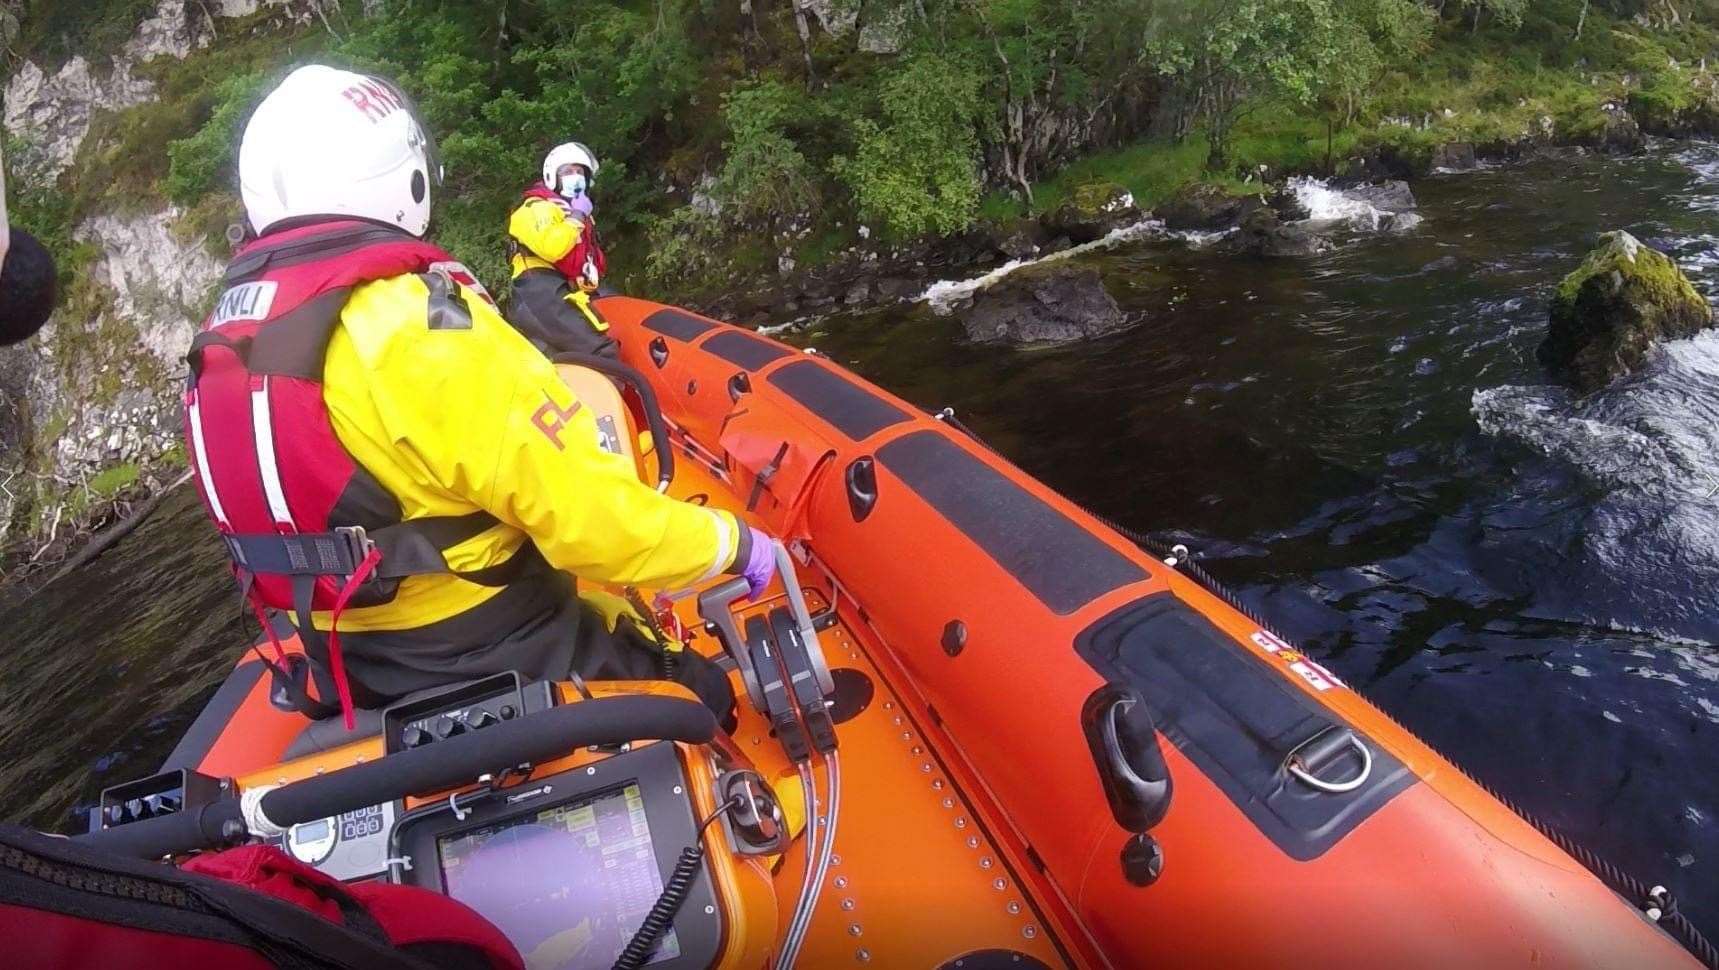 The Loch Ness RNLI crew go to the rescue one of the boys.